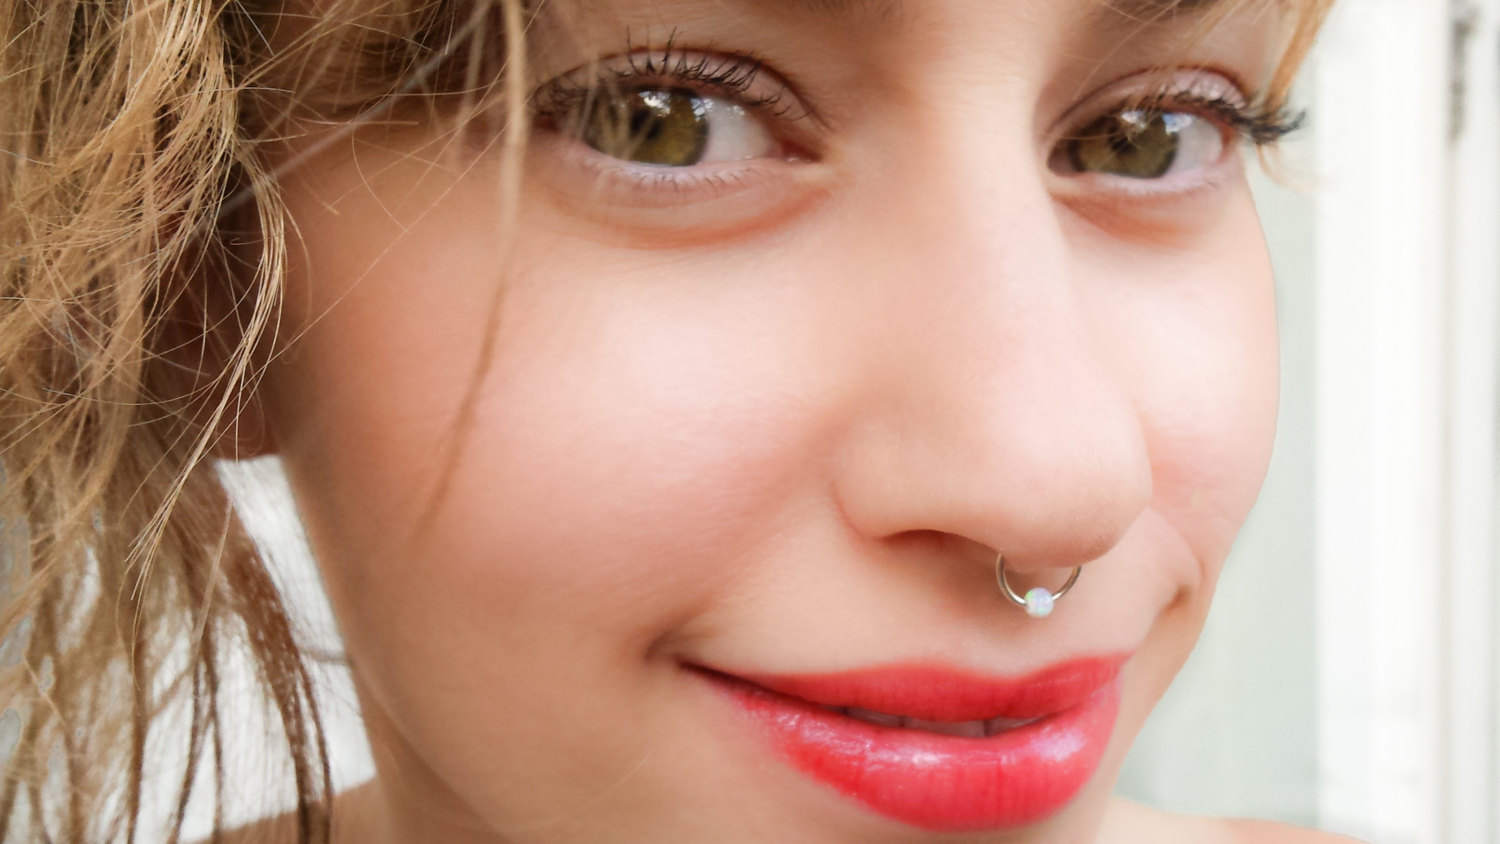 Best fake nose and septum rings